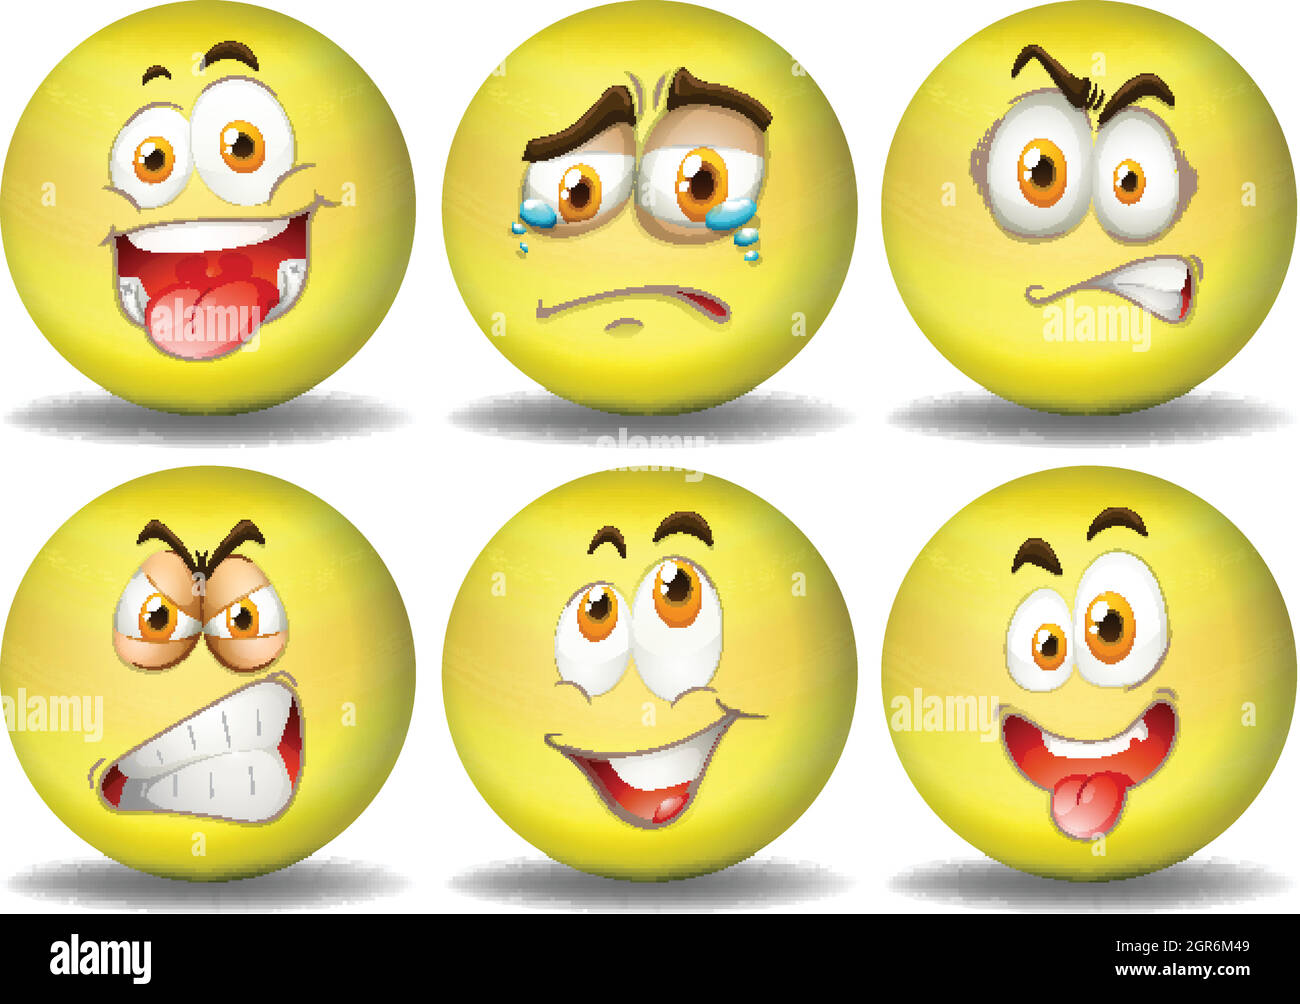 Yellow ball expressions emoticons Stock Vector